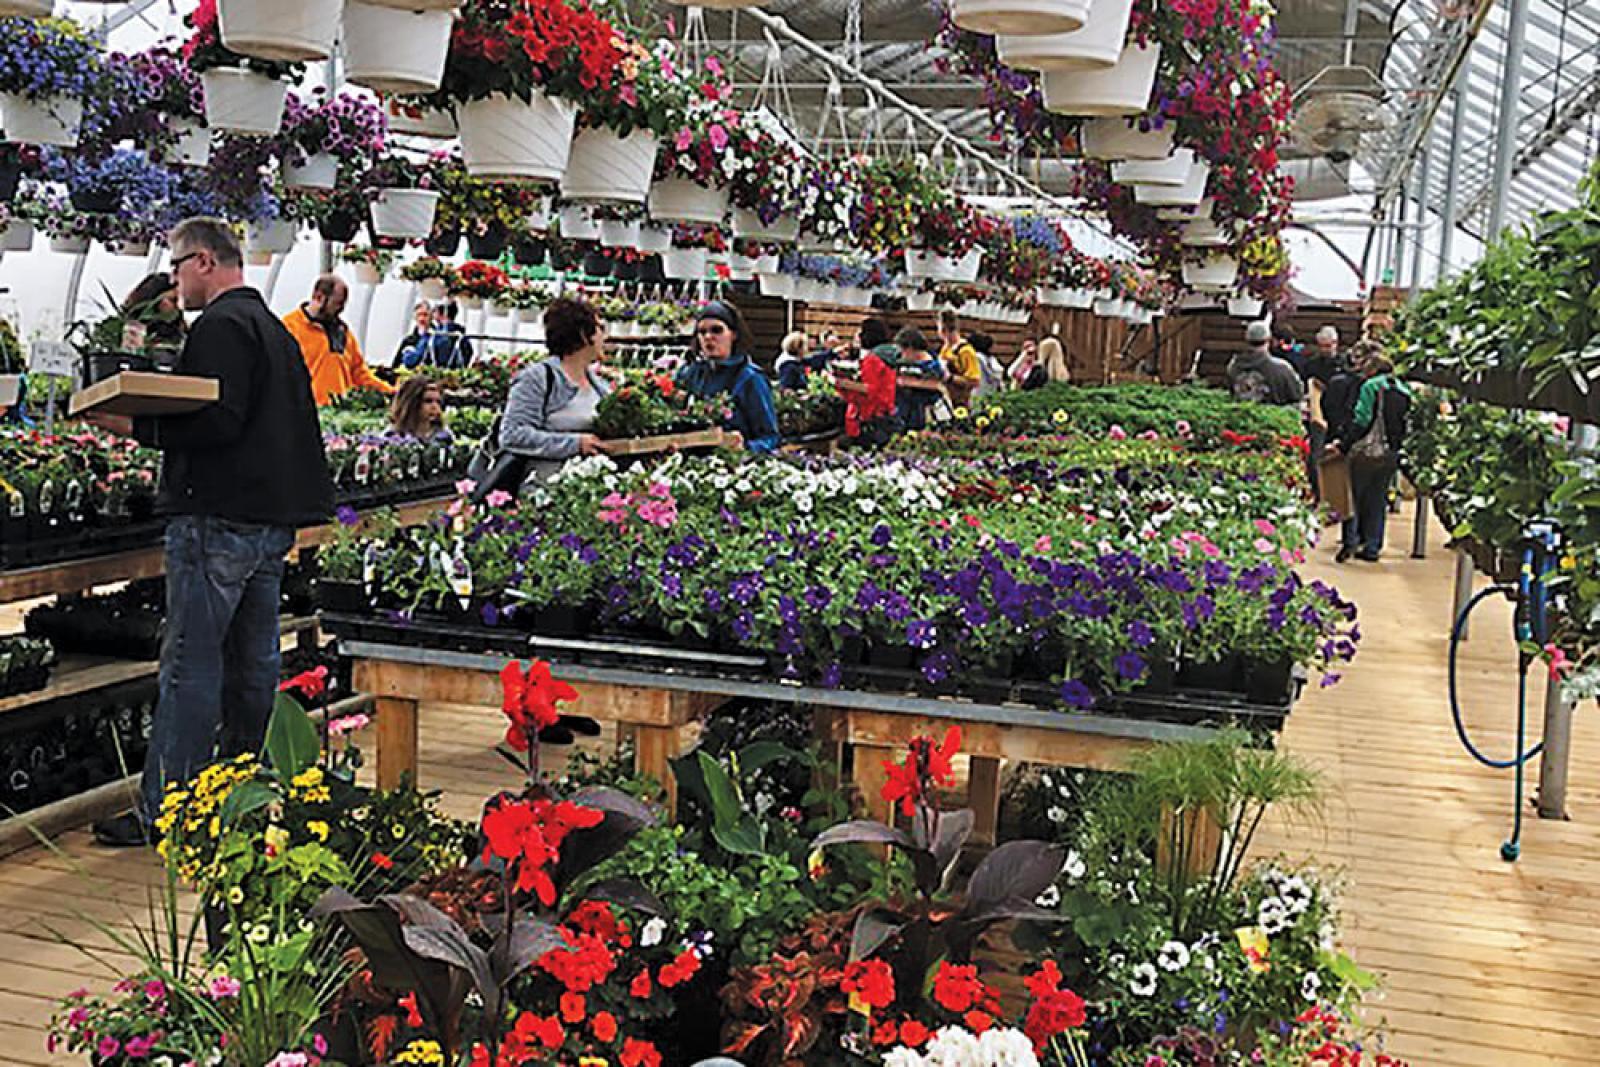 Where quality, service and selection are emphasized, retail garden centres continue to do well. 